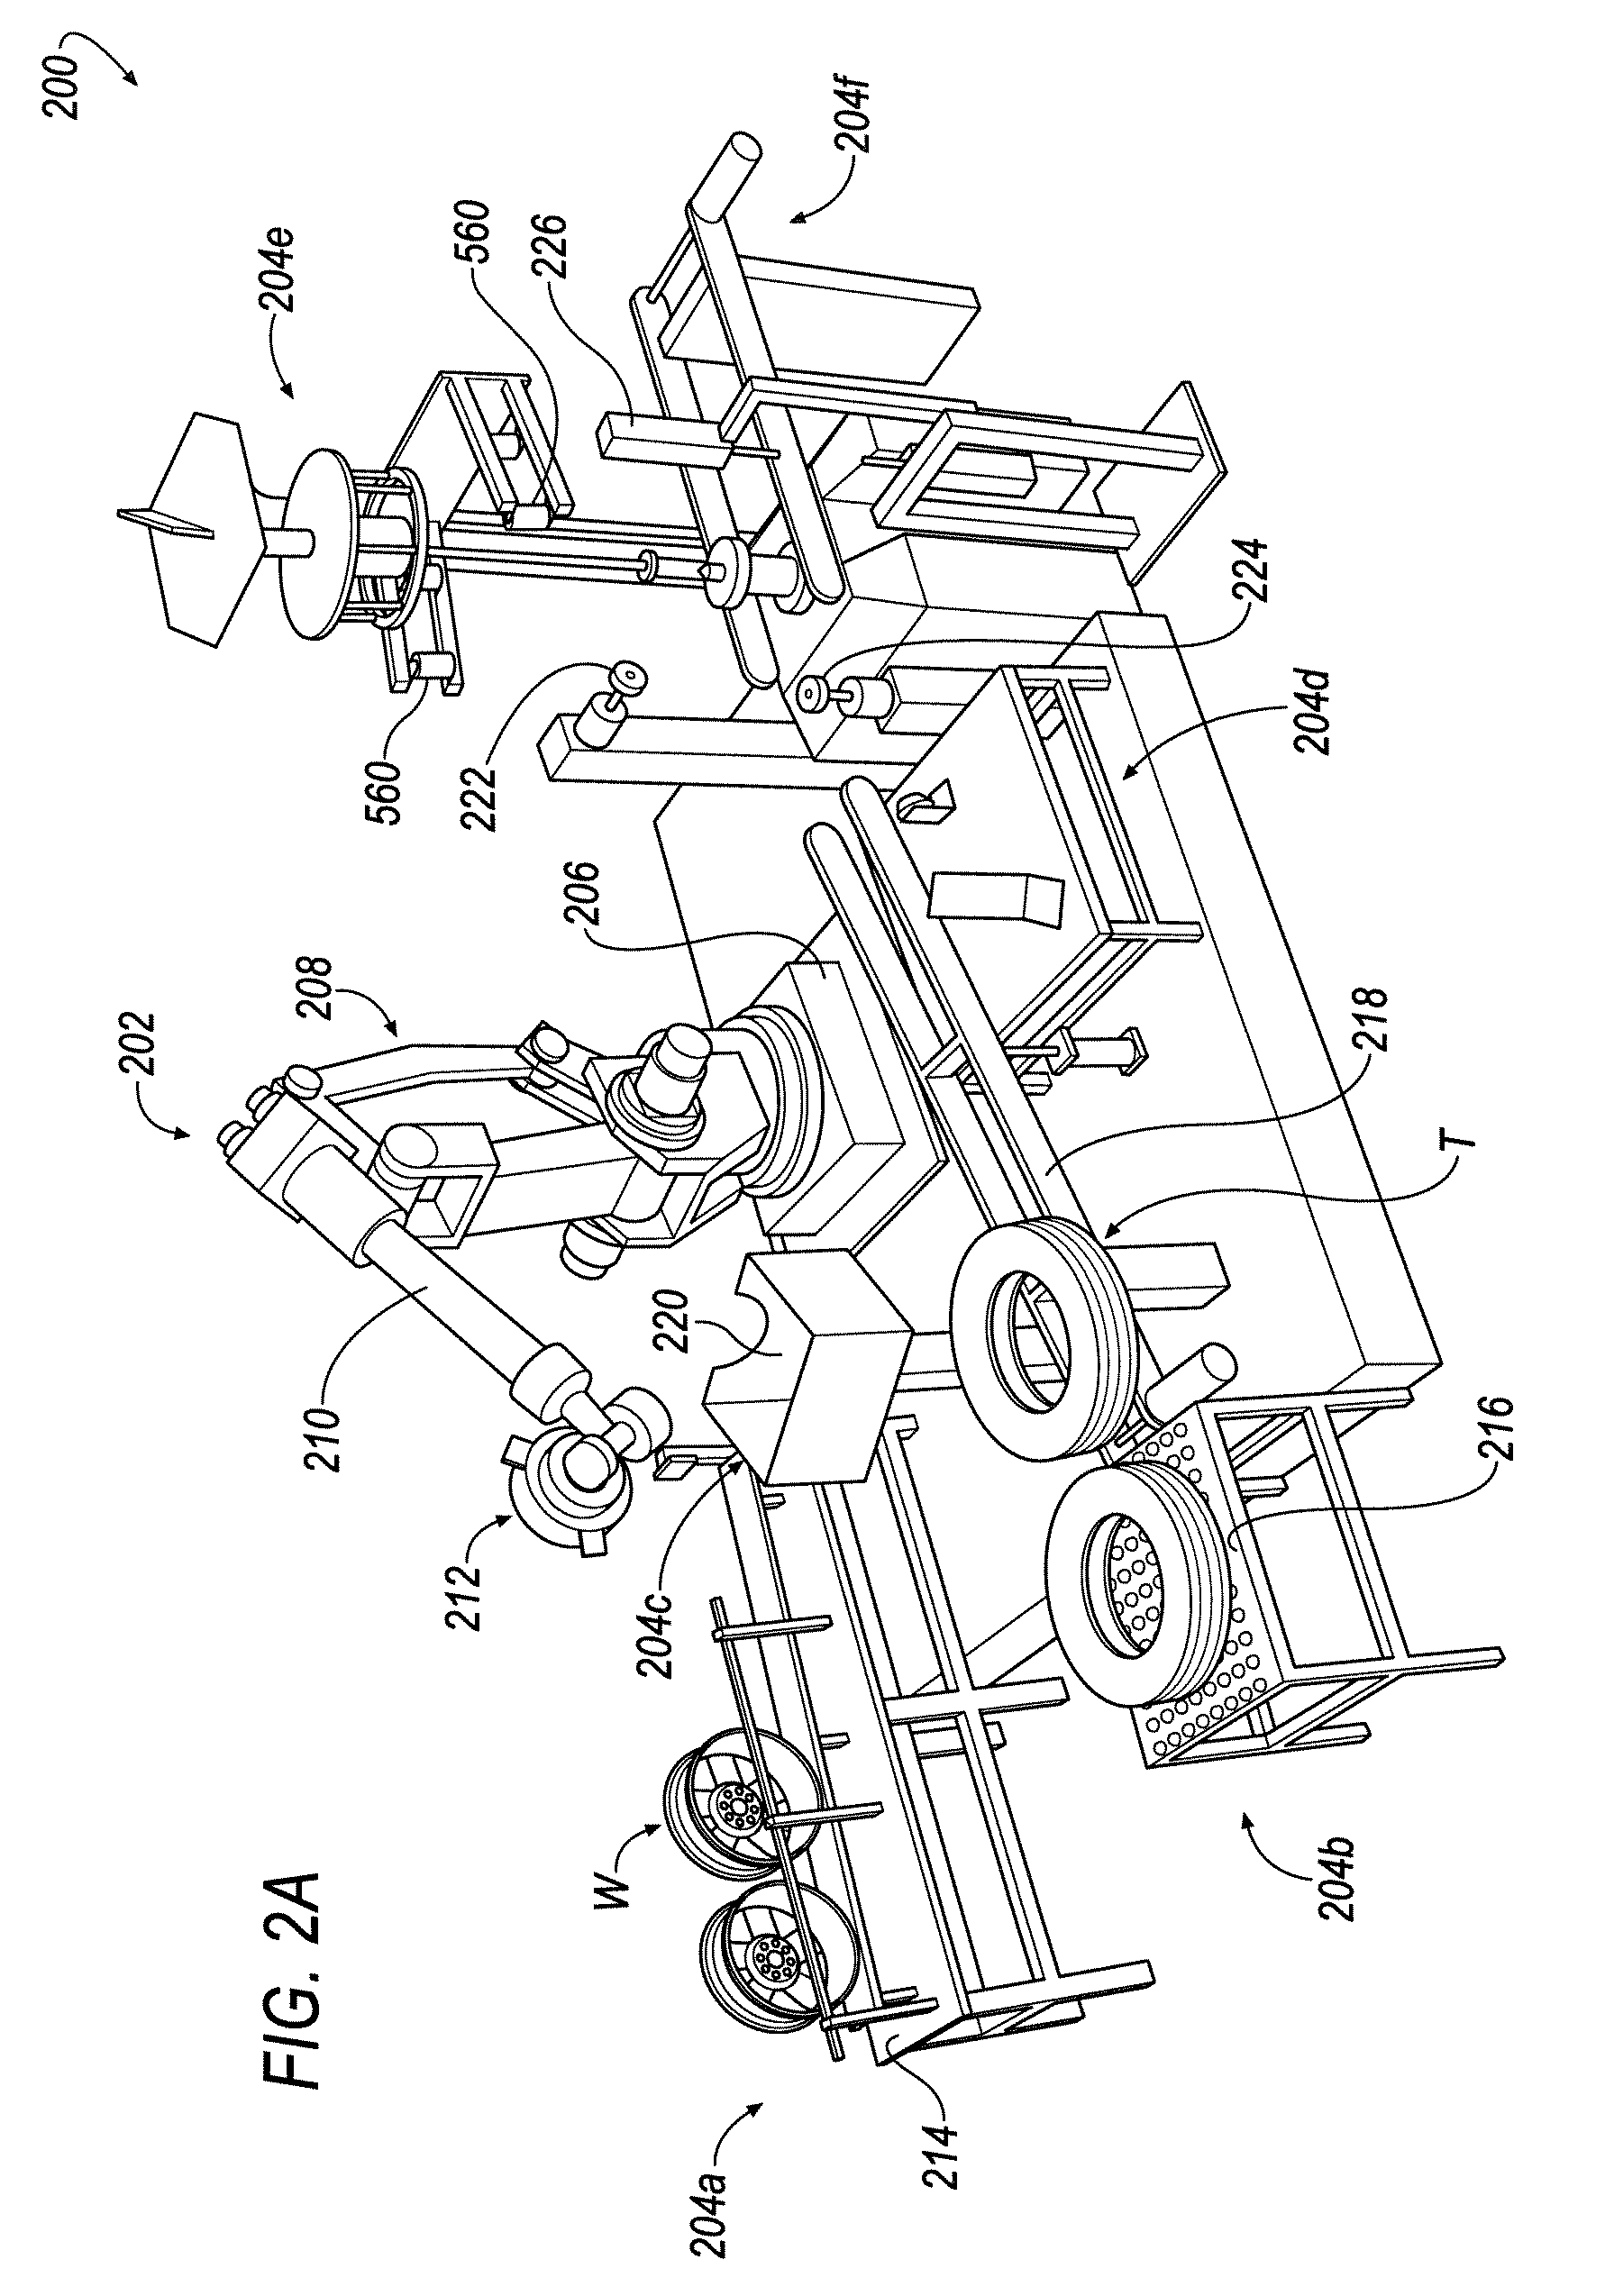 System and Method for Assembling a Tire and a Wheel